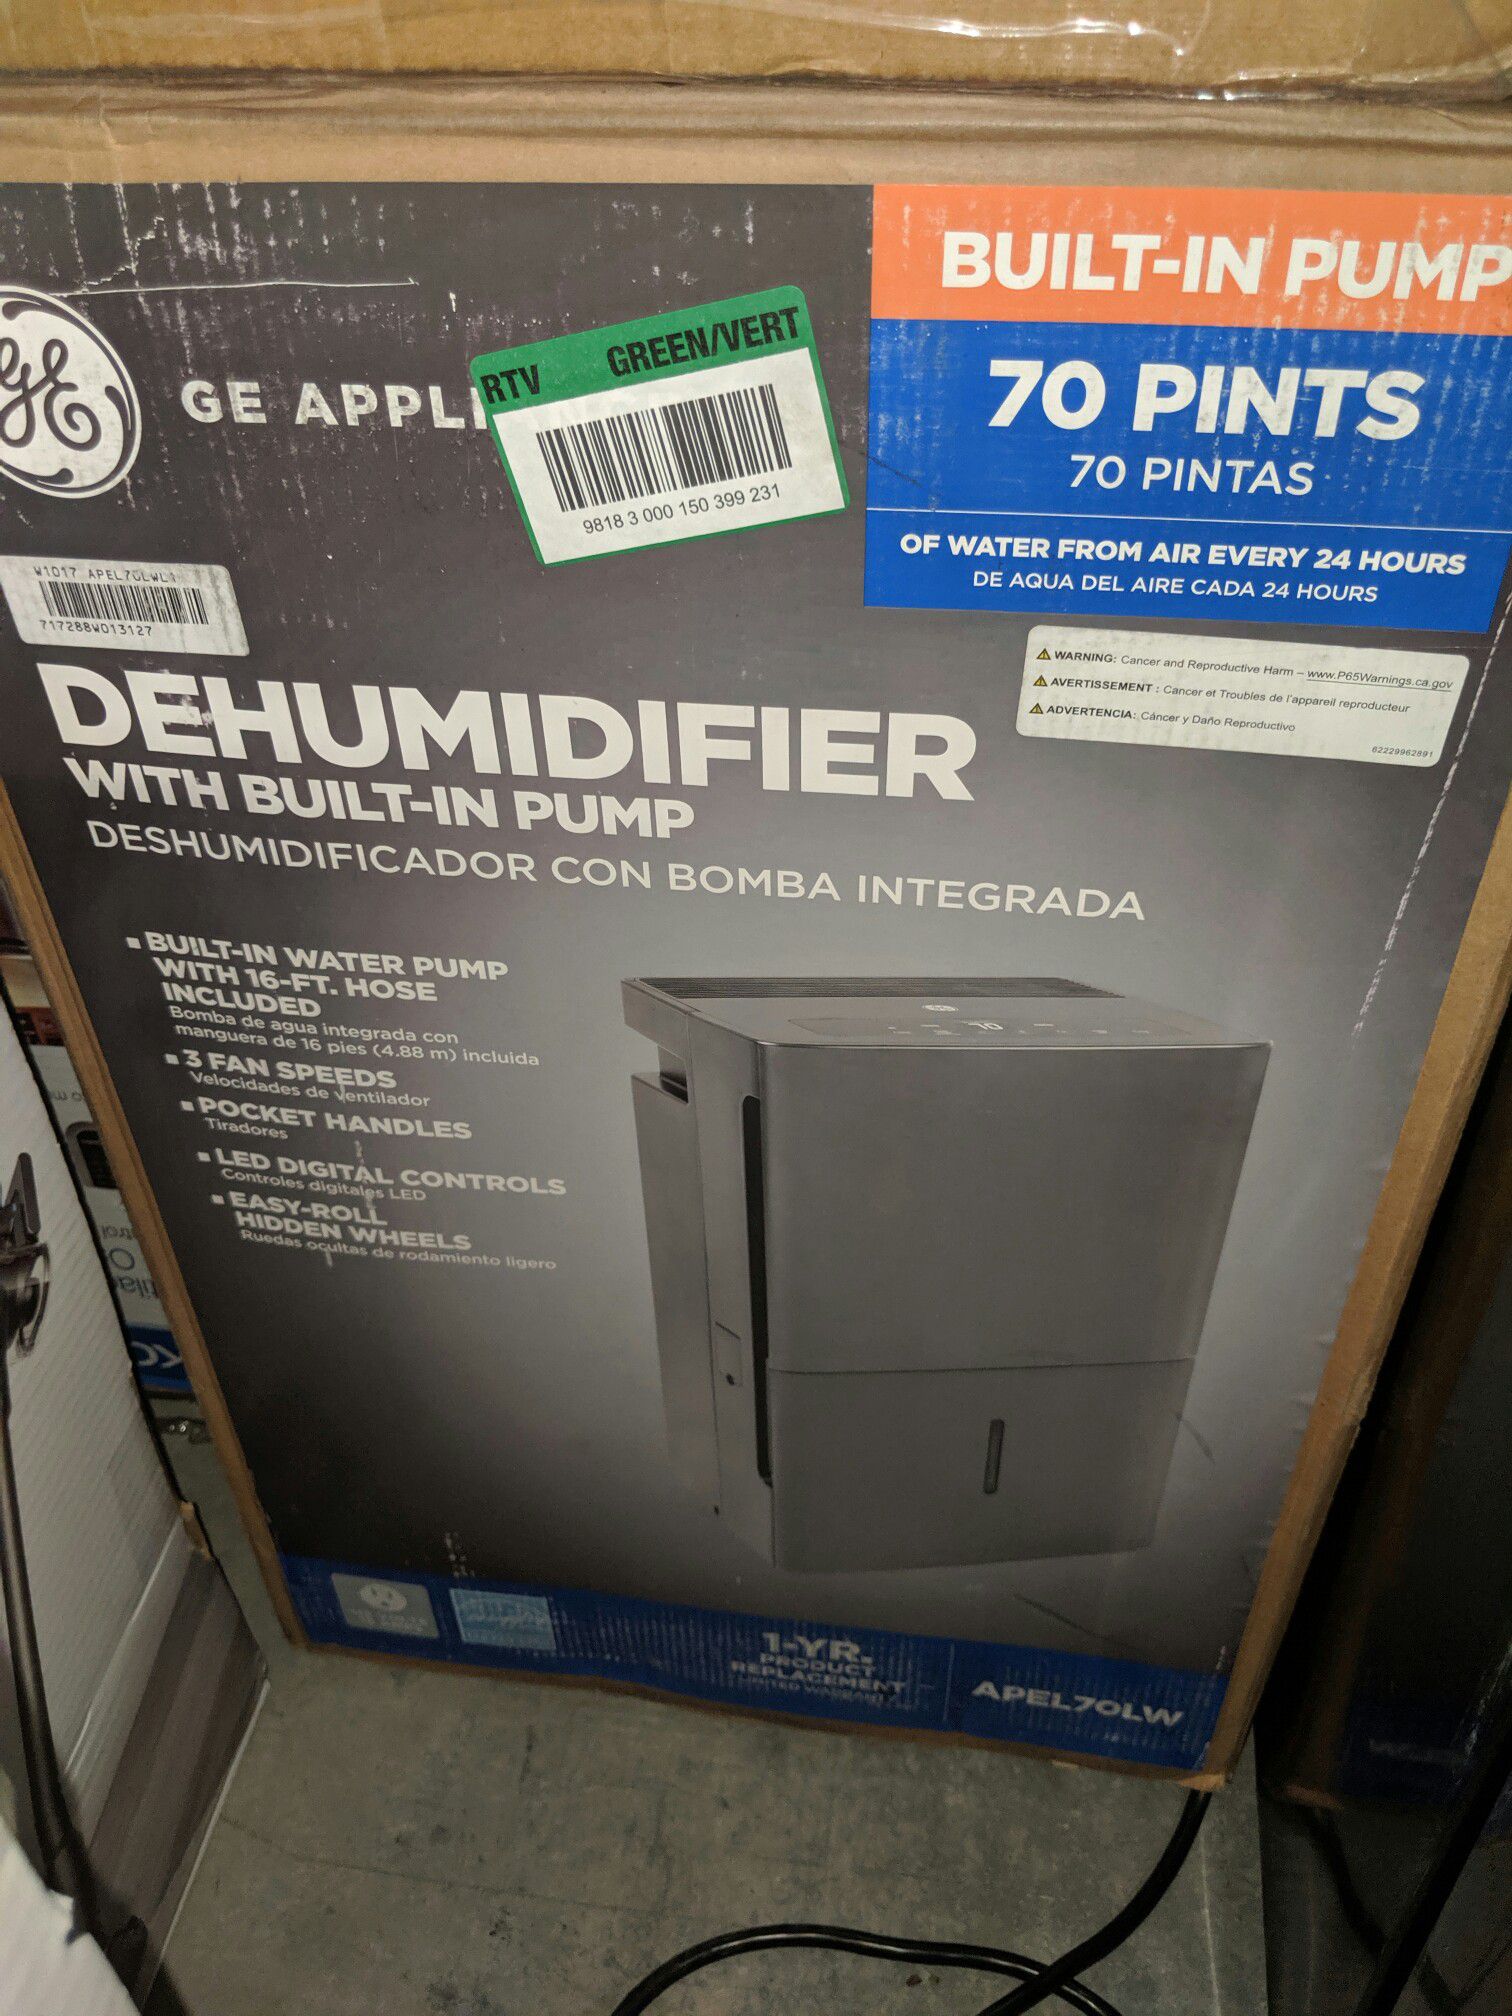 NEW GE 70 pt. Dehumidifier with Built-In Pump, ENERGY STAR